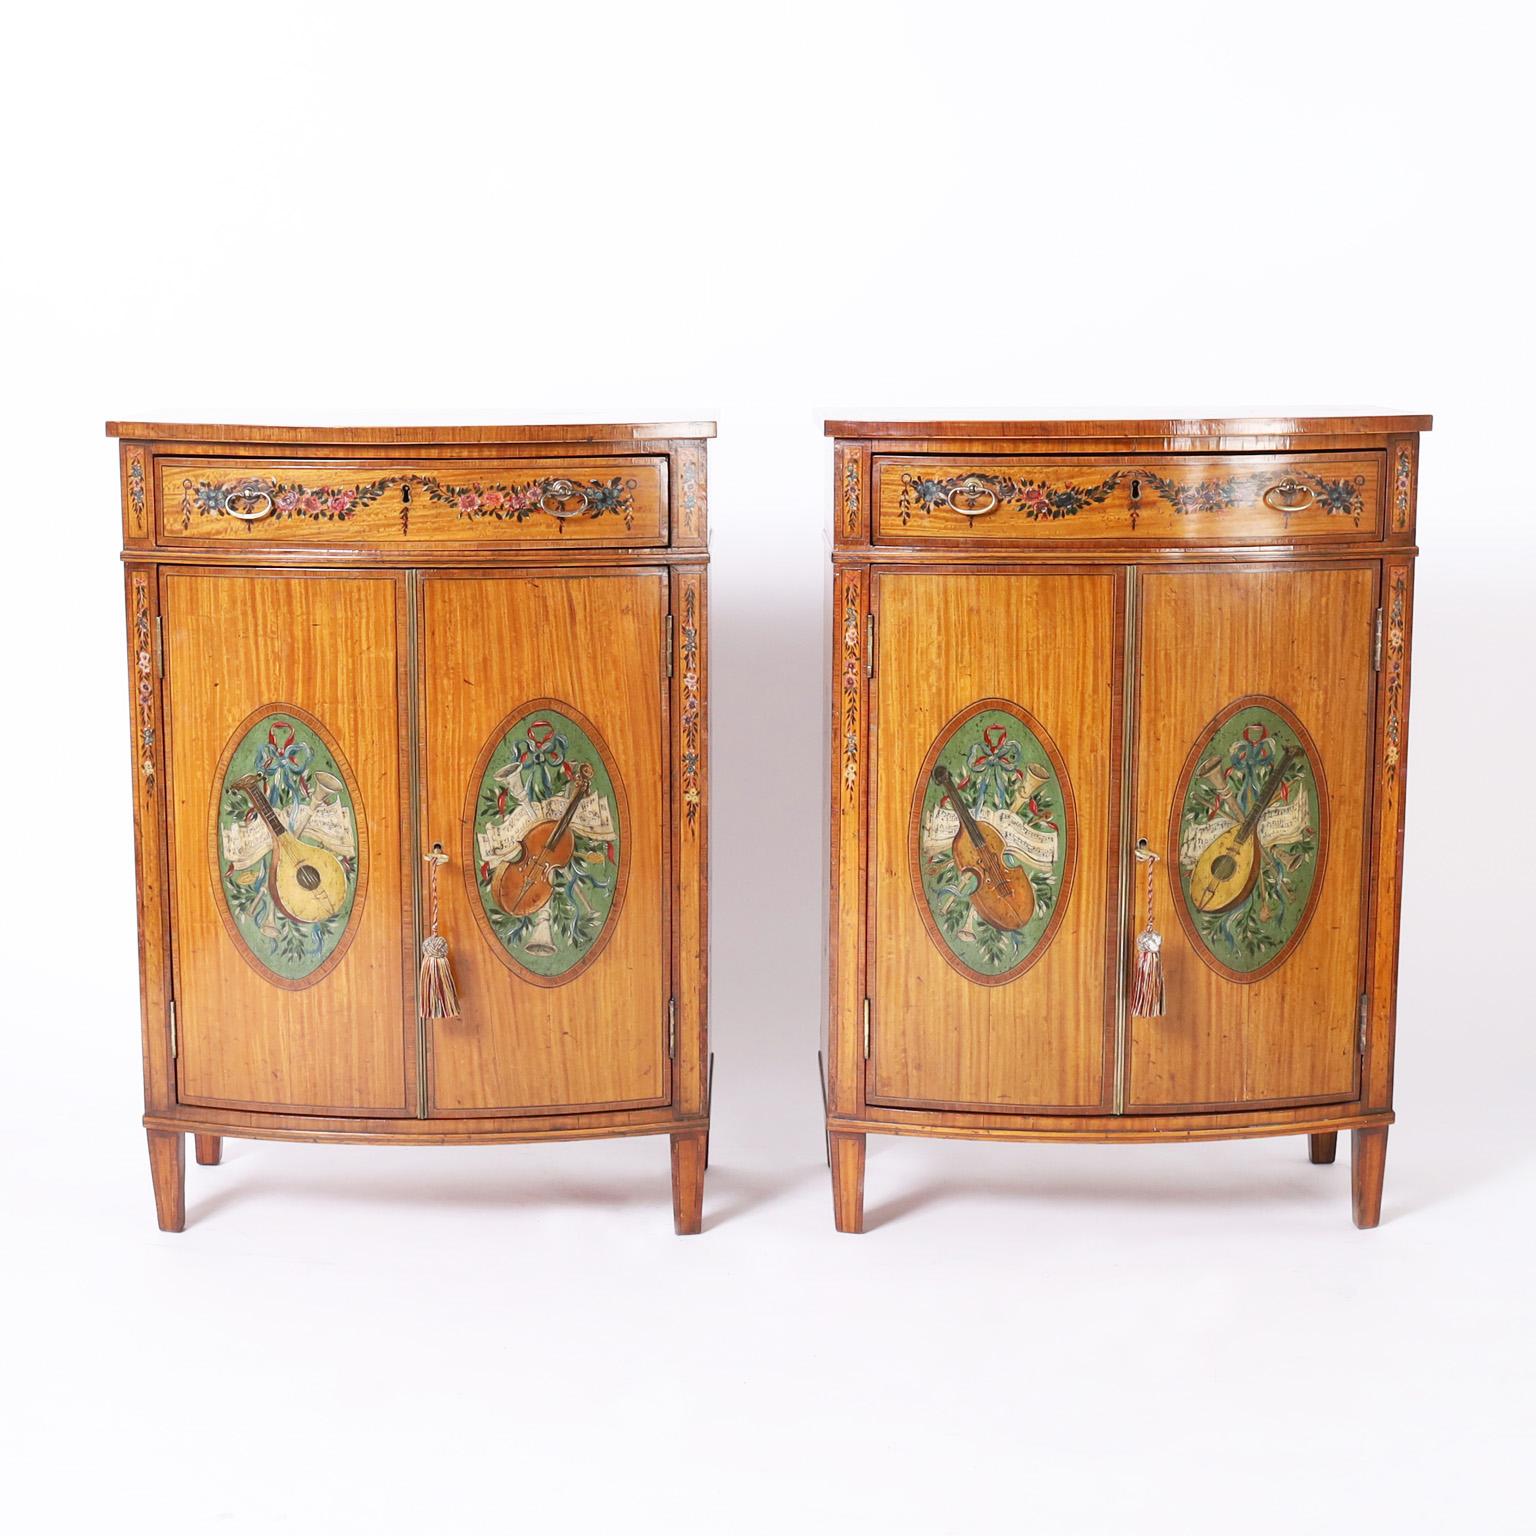 Standout pair of antique English bow front cabinets crafted in satinwood and mahogany with one drawer and two doors paint decorated with musical motifs such as horns, violins and lutes in classic Adam style.